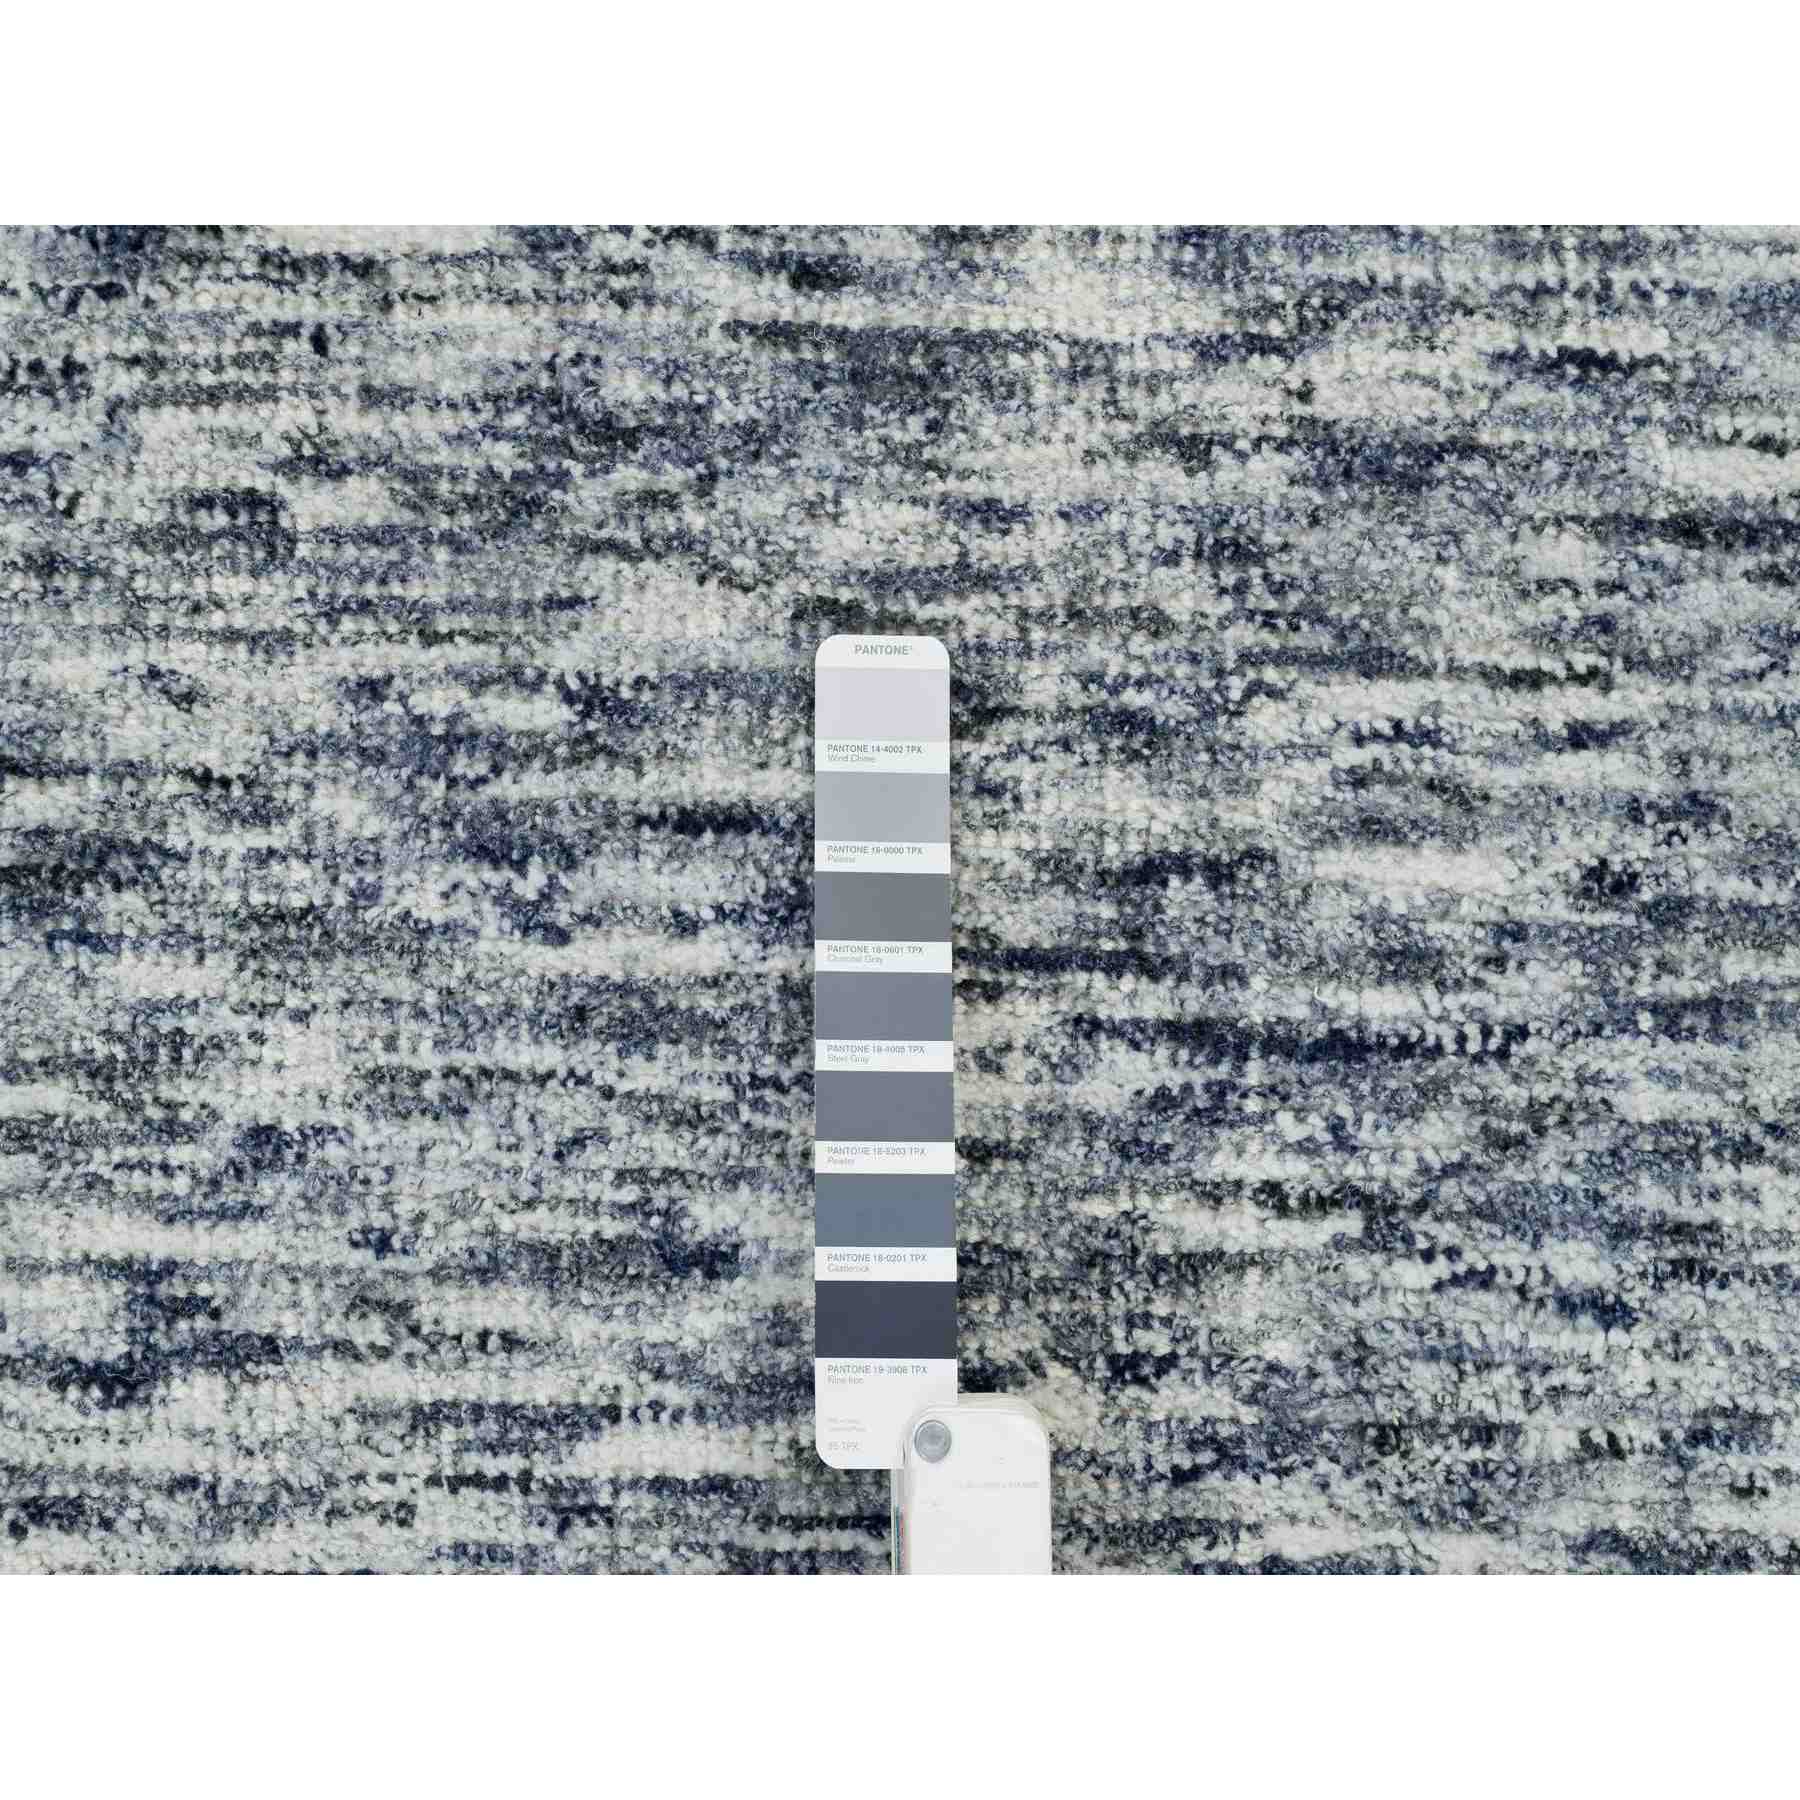 Modern-and-Contemporary-Hand-Loomed-Rug-326210